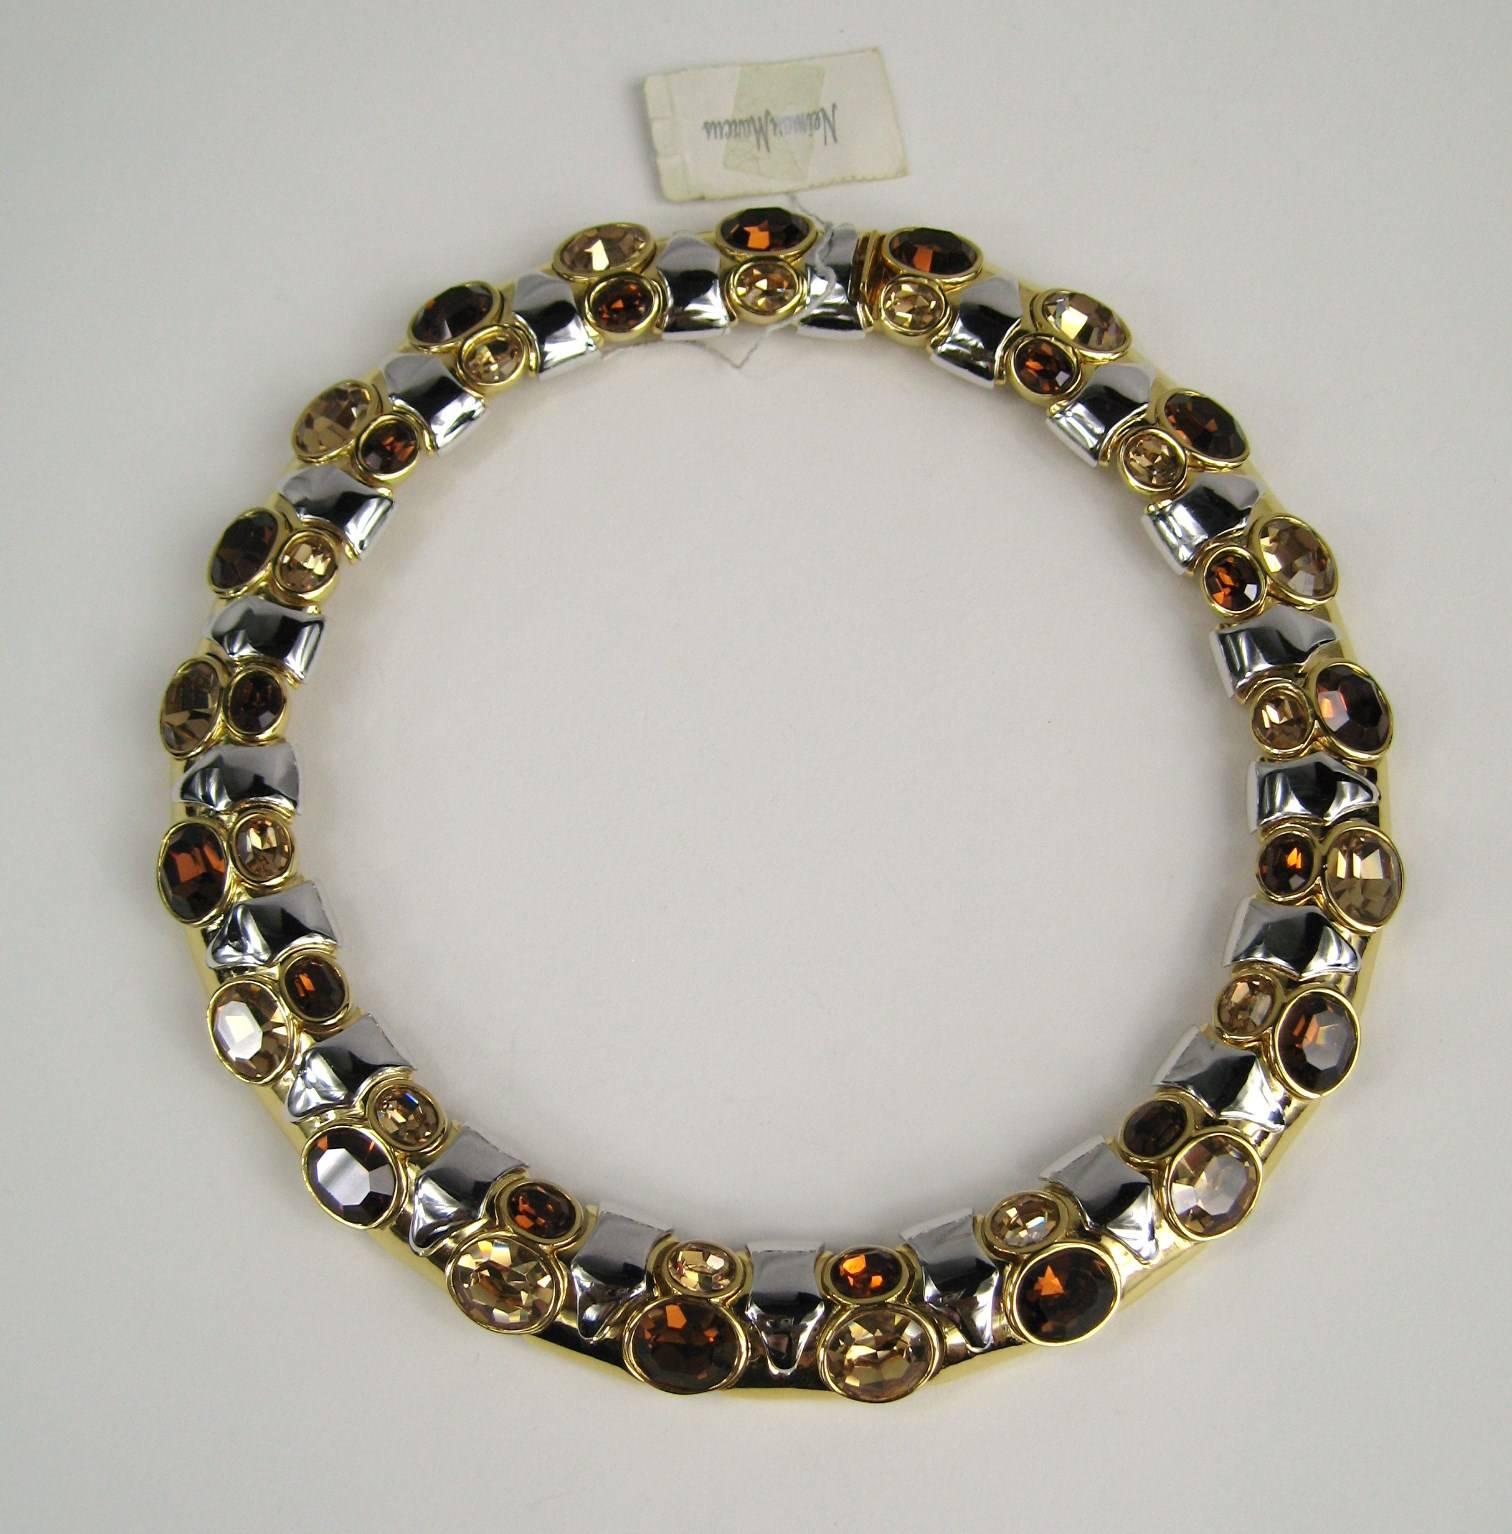 Stunning Ciner Necklace purchased in the late 1980s. Large Facated stones in a white & yellow Gold tone Gilt. Price tag still attached from Neiman Marcus. Measuring .75 in. wide x 17 in. New Old Stock, never worn. This is out of a massive collection